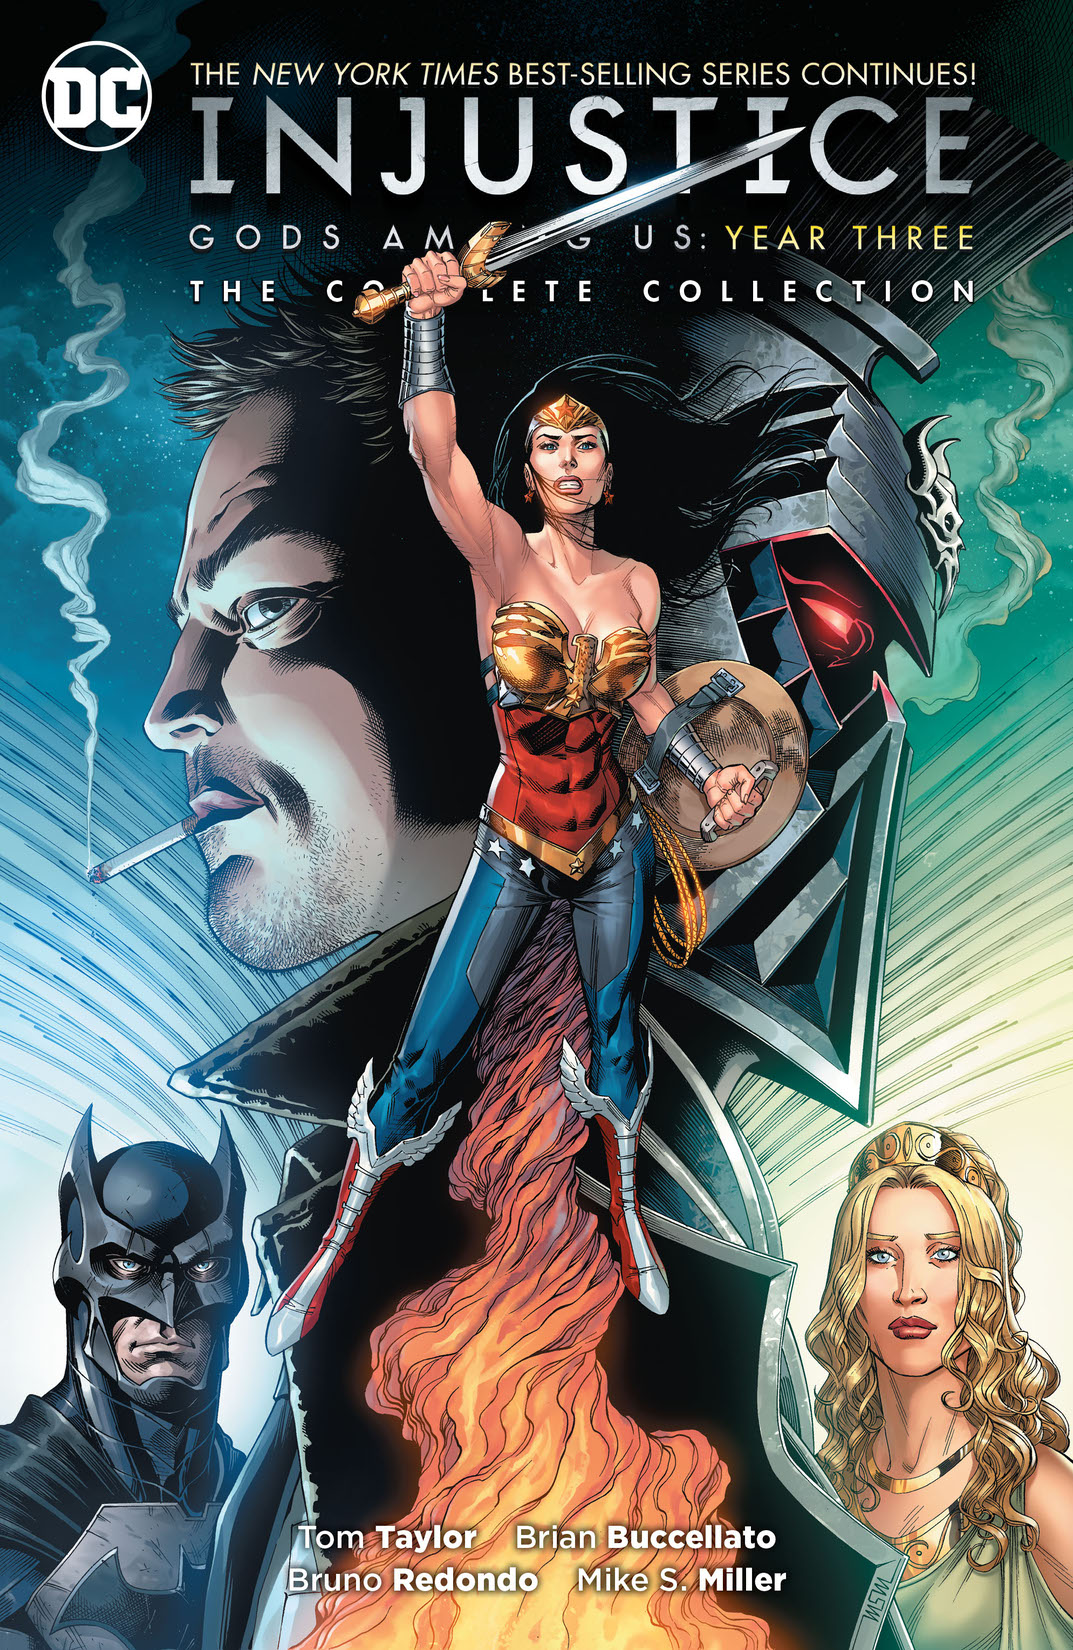 Injustice: Gods Among Us Year Three - The Complete Collection preview images